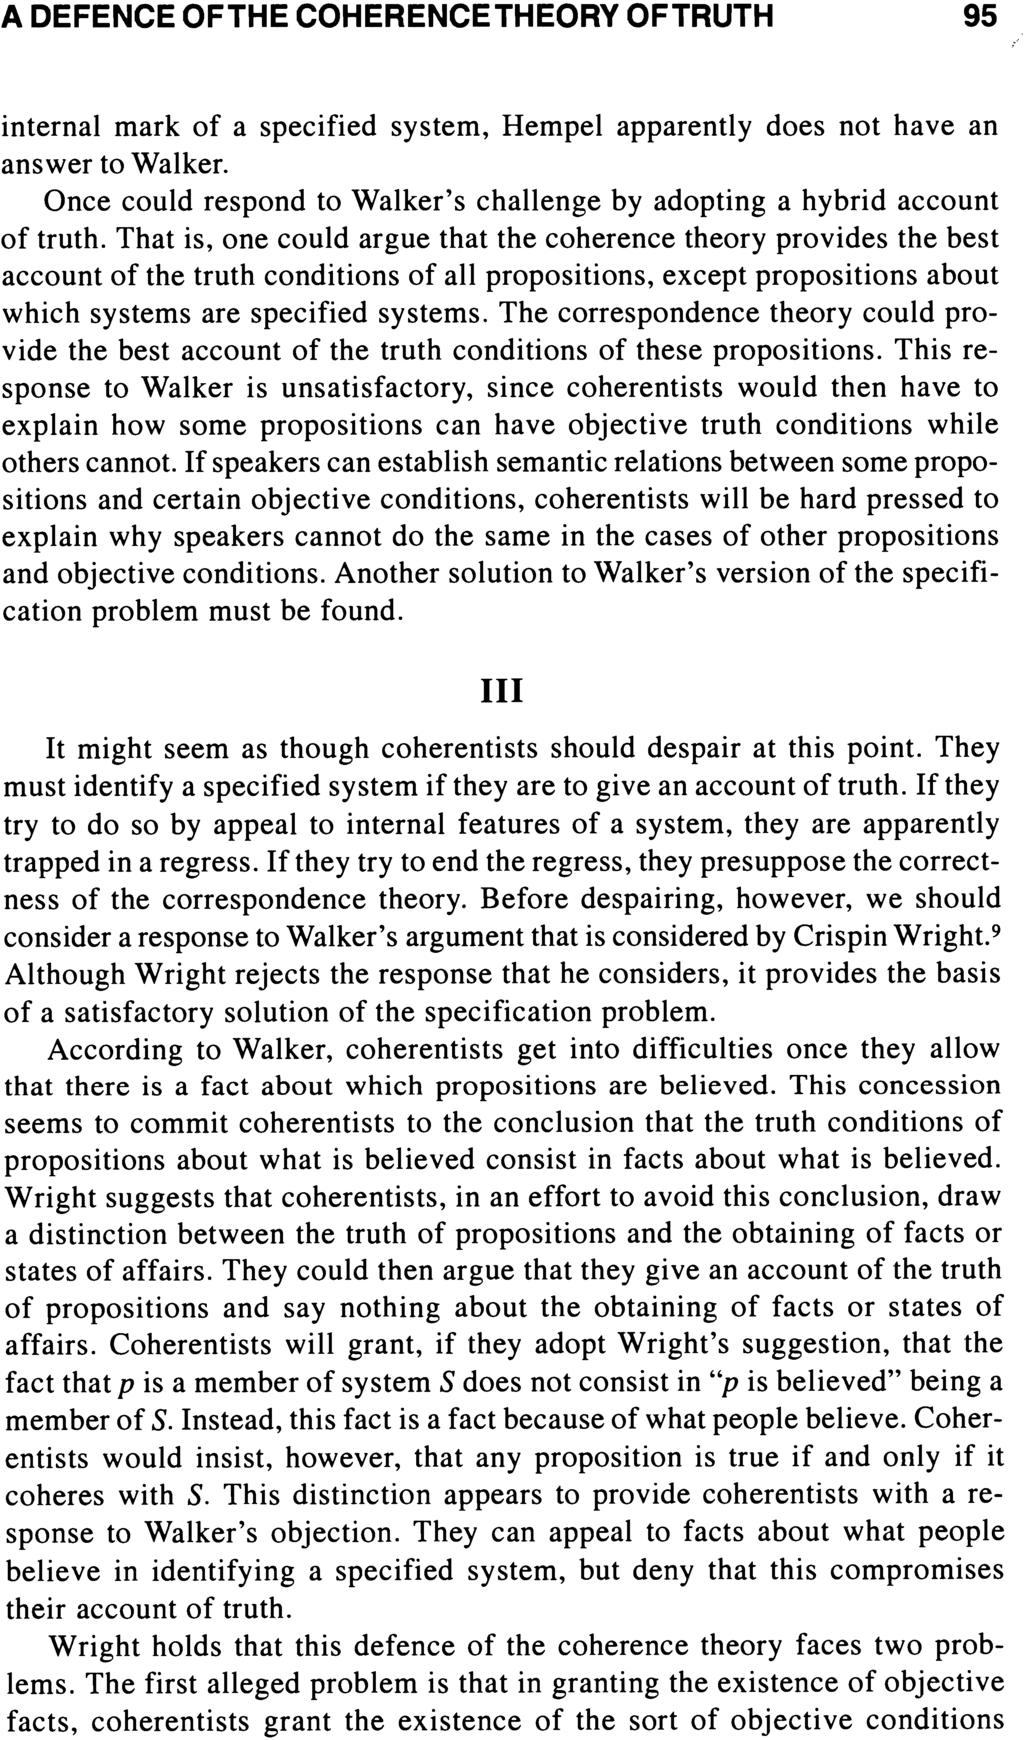 A DEFENCE OFTHE COHERENCE THEORY OFTRUTH 95 internal mark of a specified system, Hempel apparently does not have an answer to Walker.